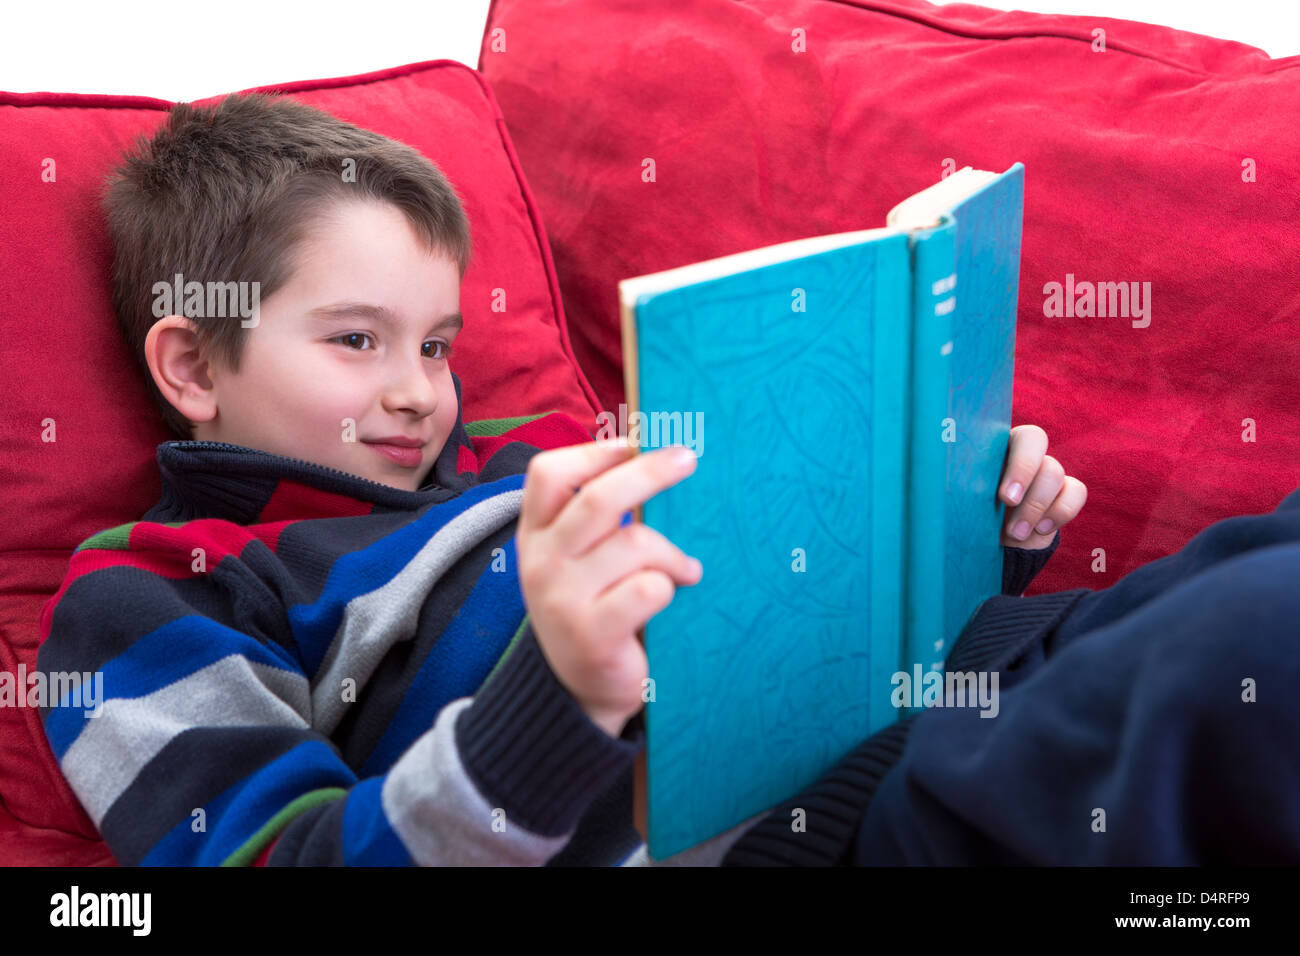 Kid enjoy reading the novel on the comfortable red couch. Stock Photo